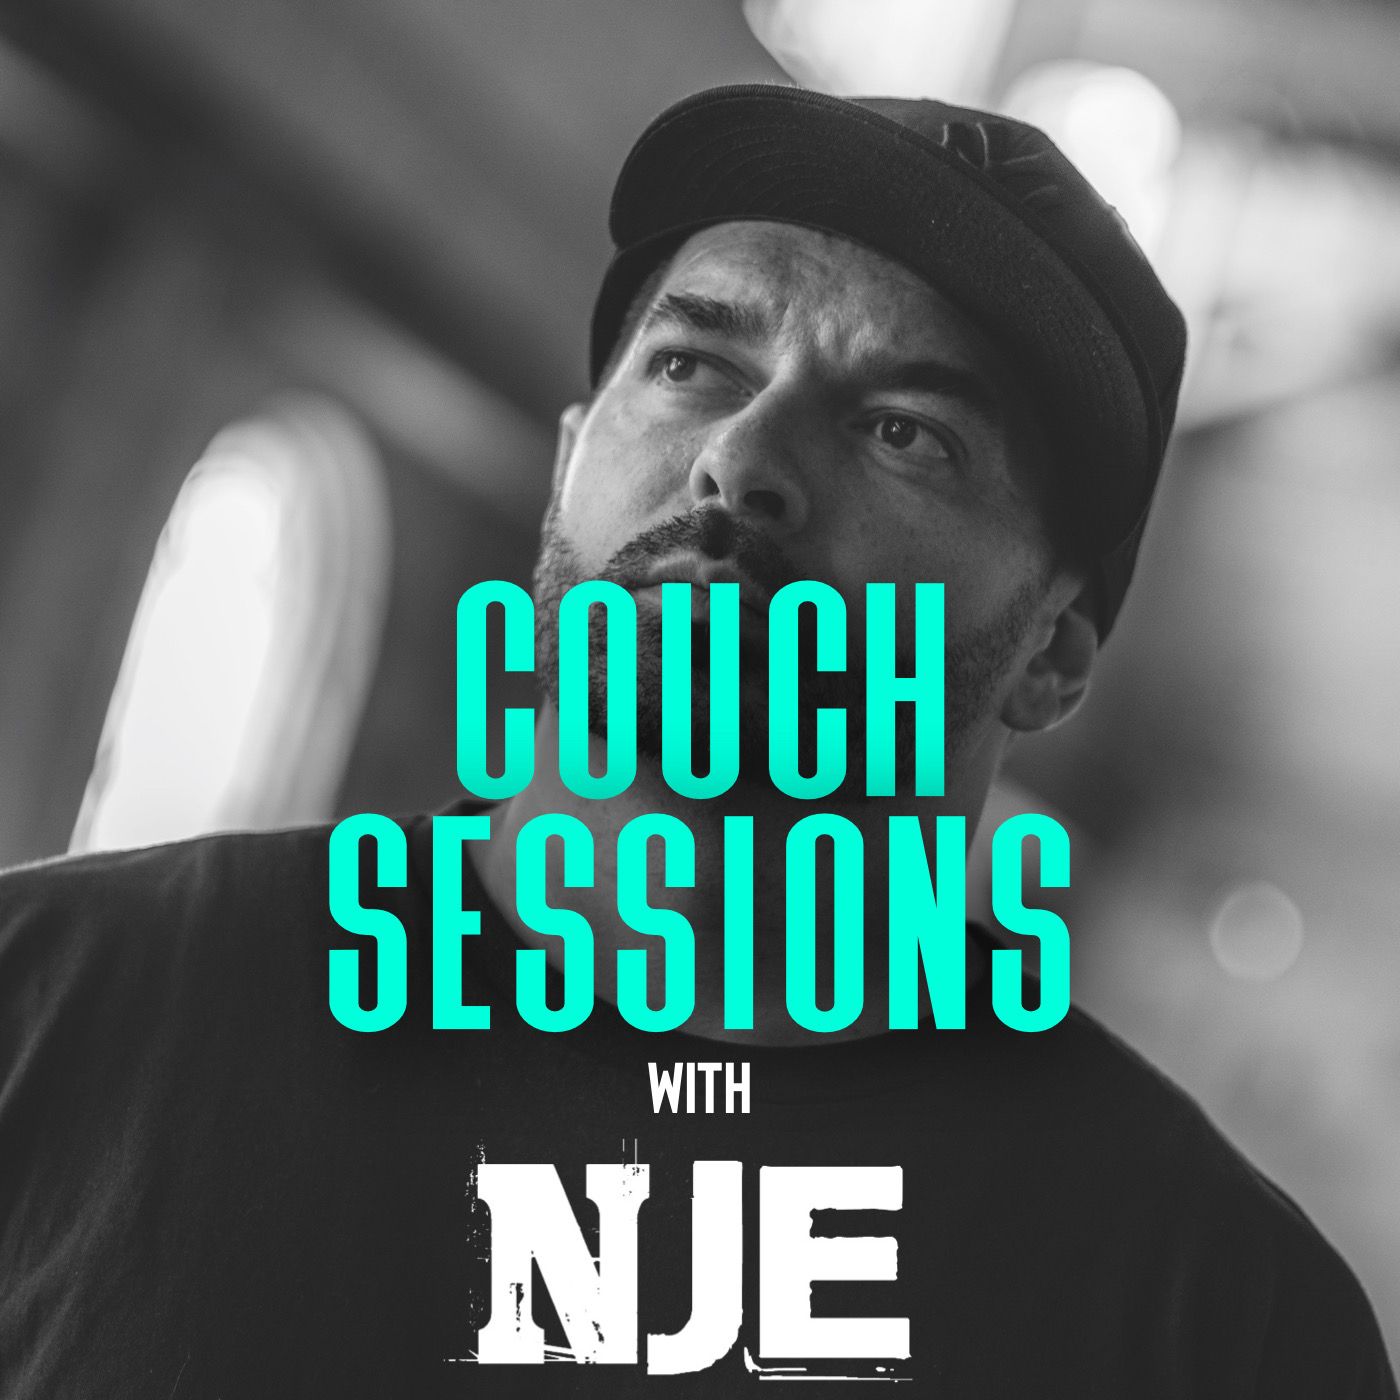 Interview with NJE (The Change In The Music Industry, Being an Independent Artist, Staying True)